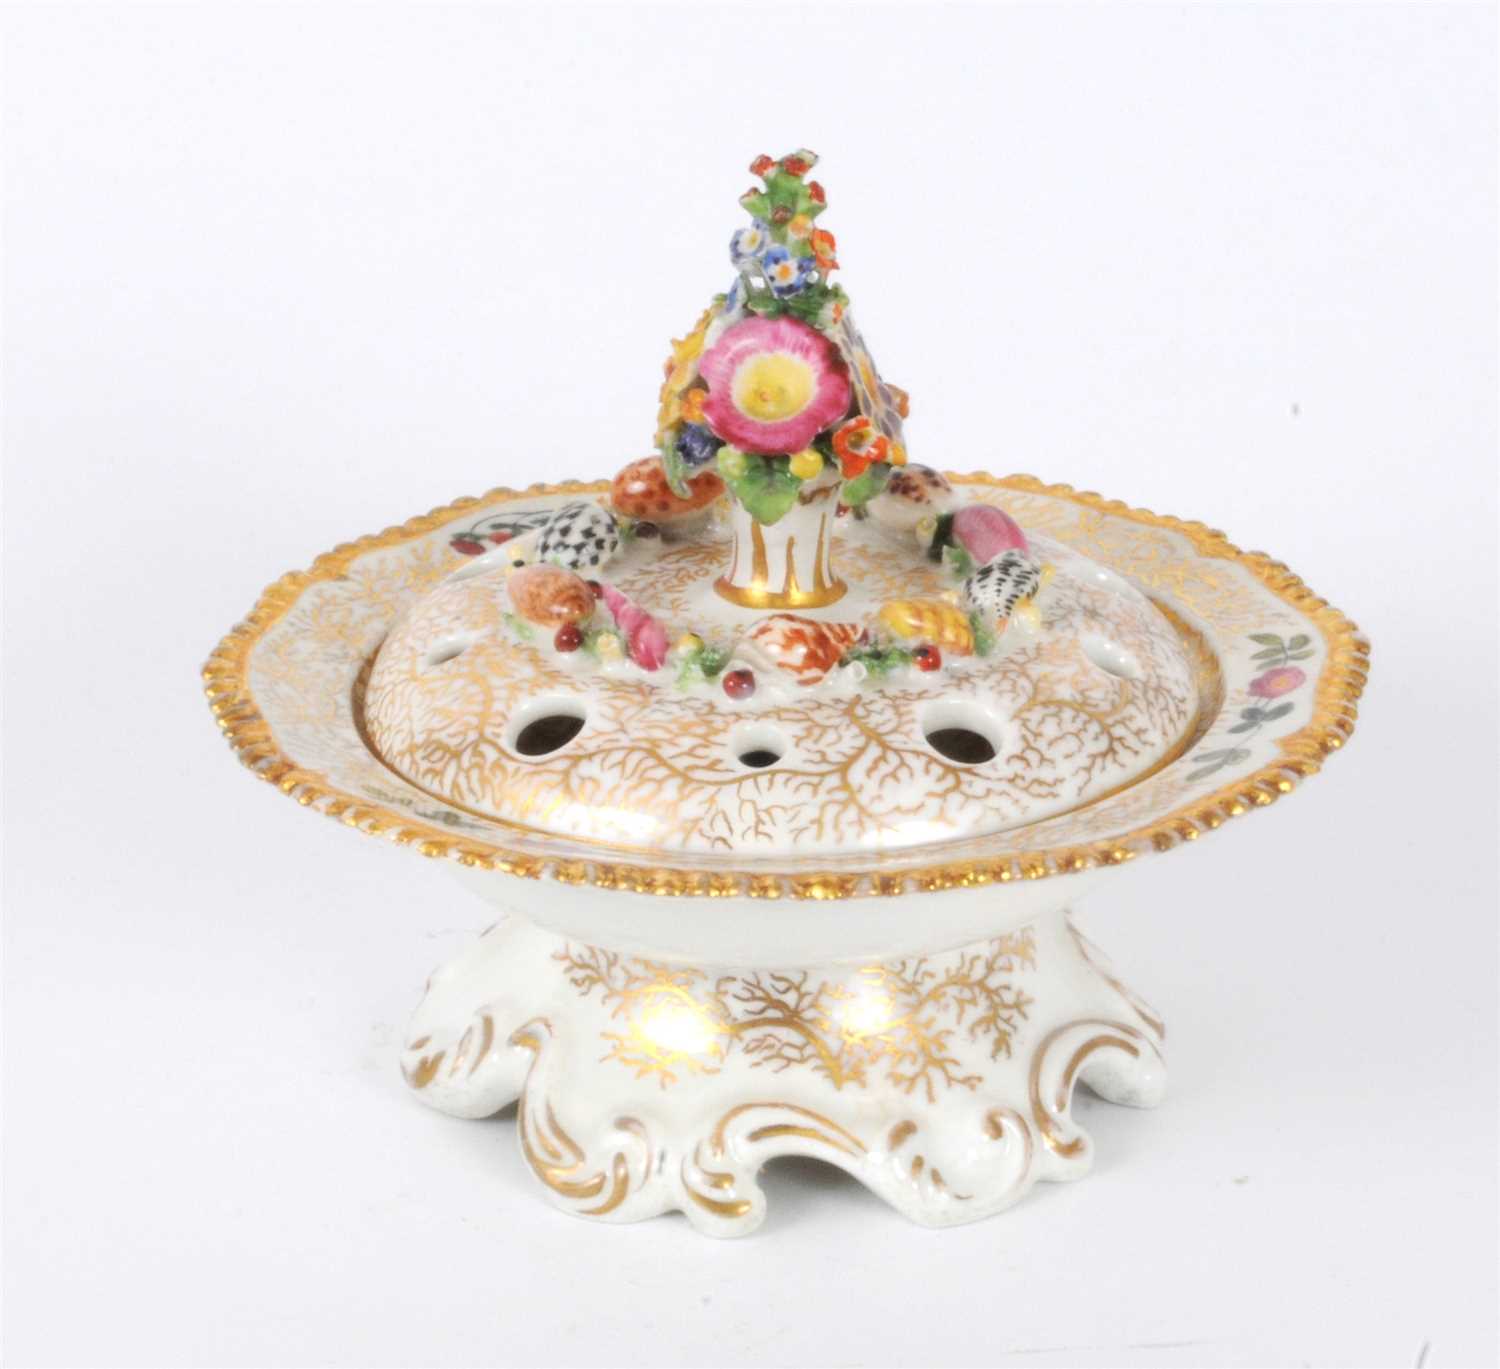 Chamberlain's Worcester pierced bowl and cover